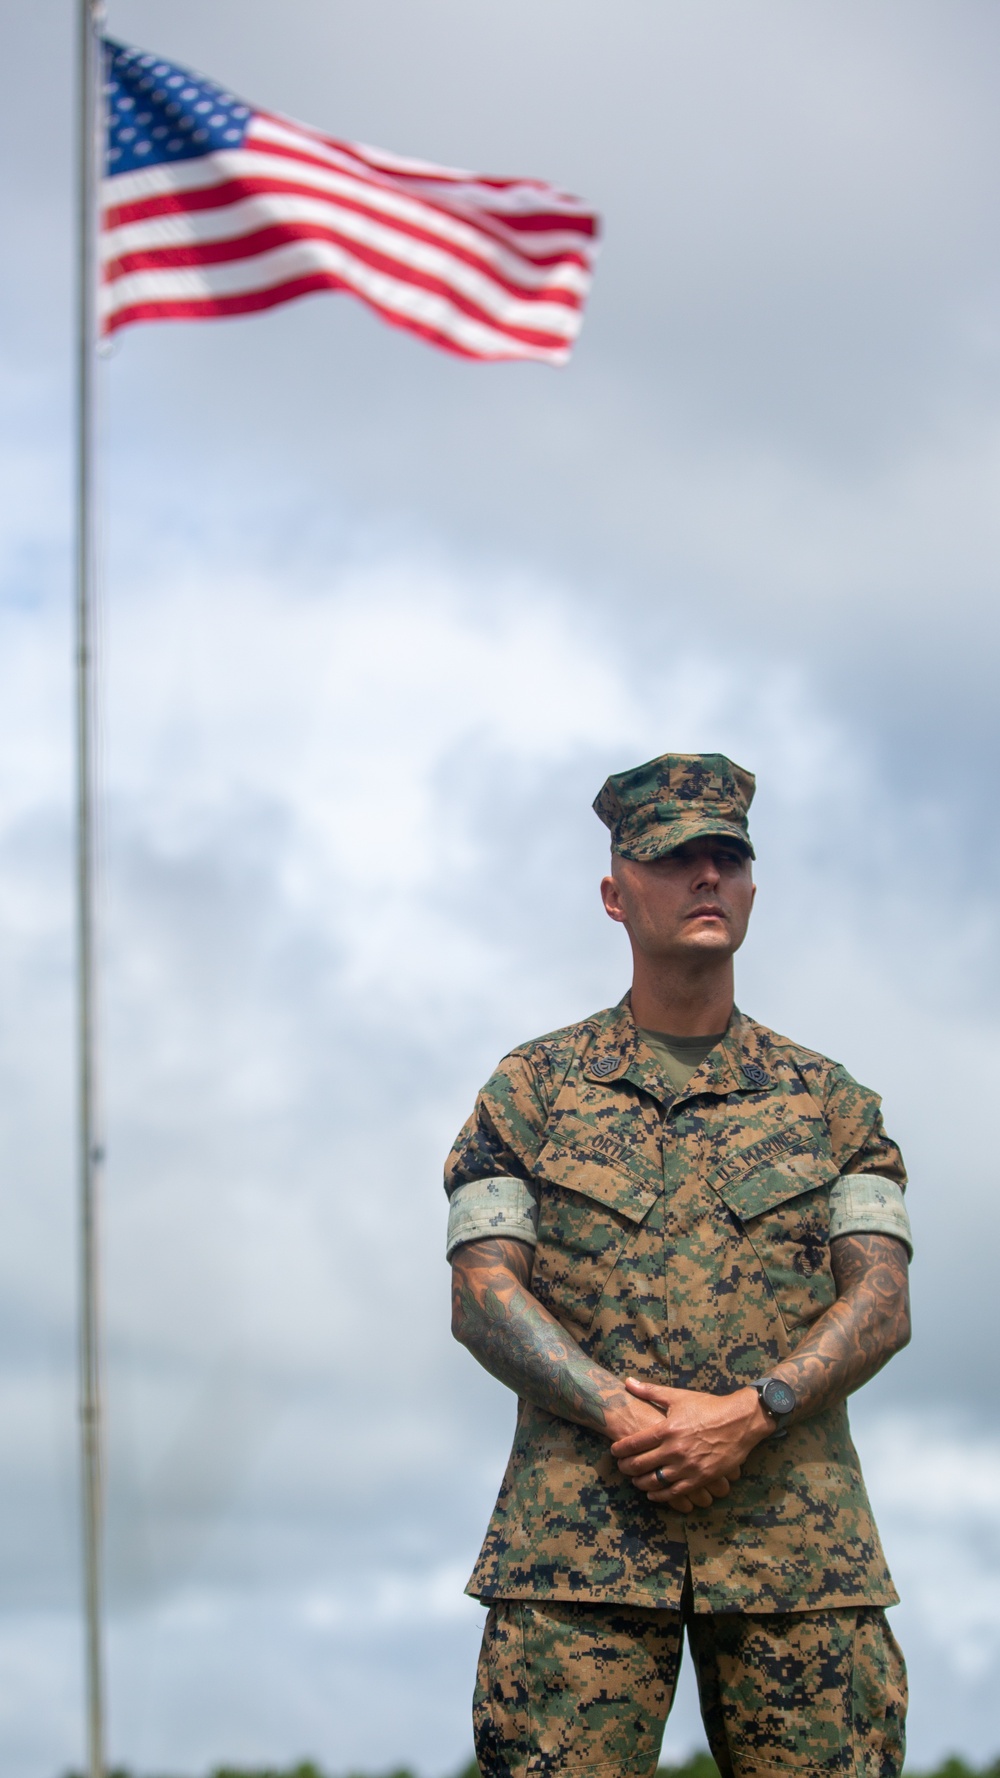 Combat-hardened Marine saves the life of a man hit by a car